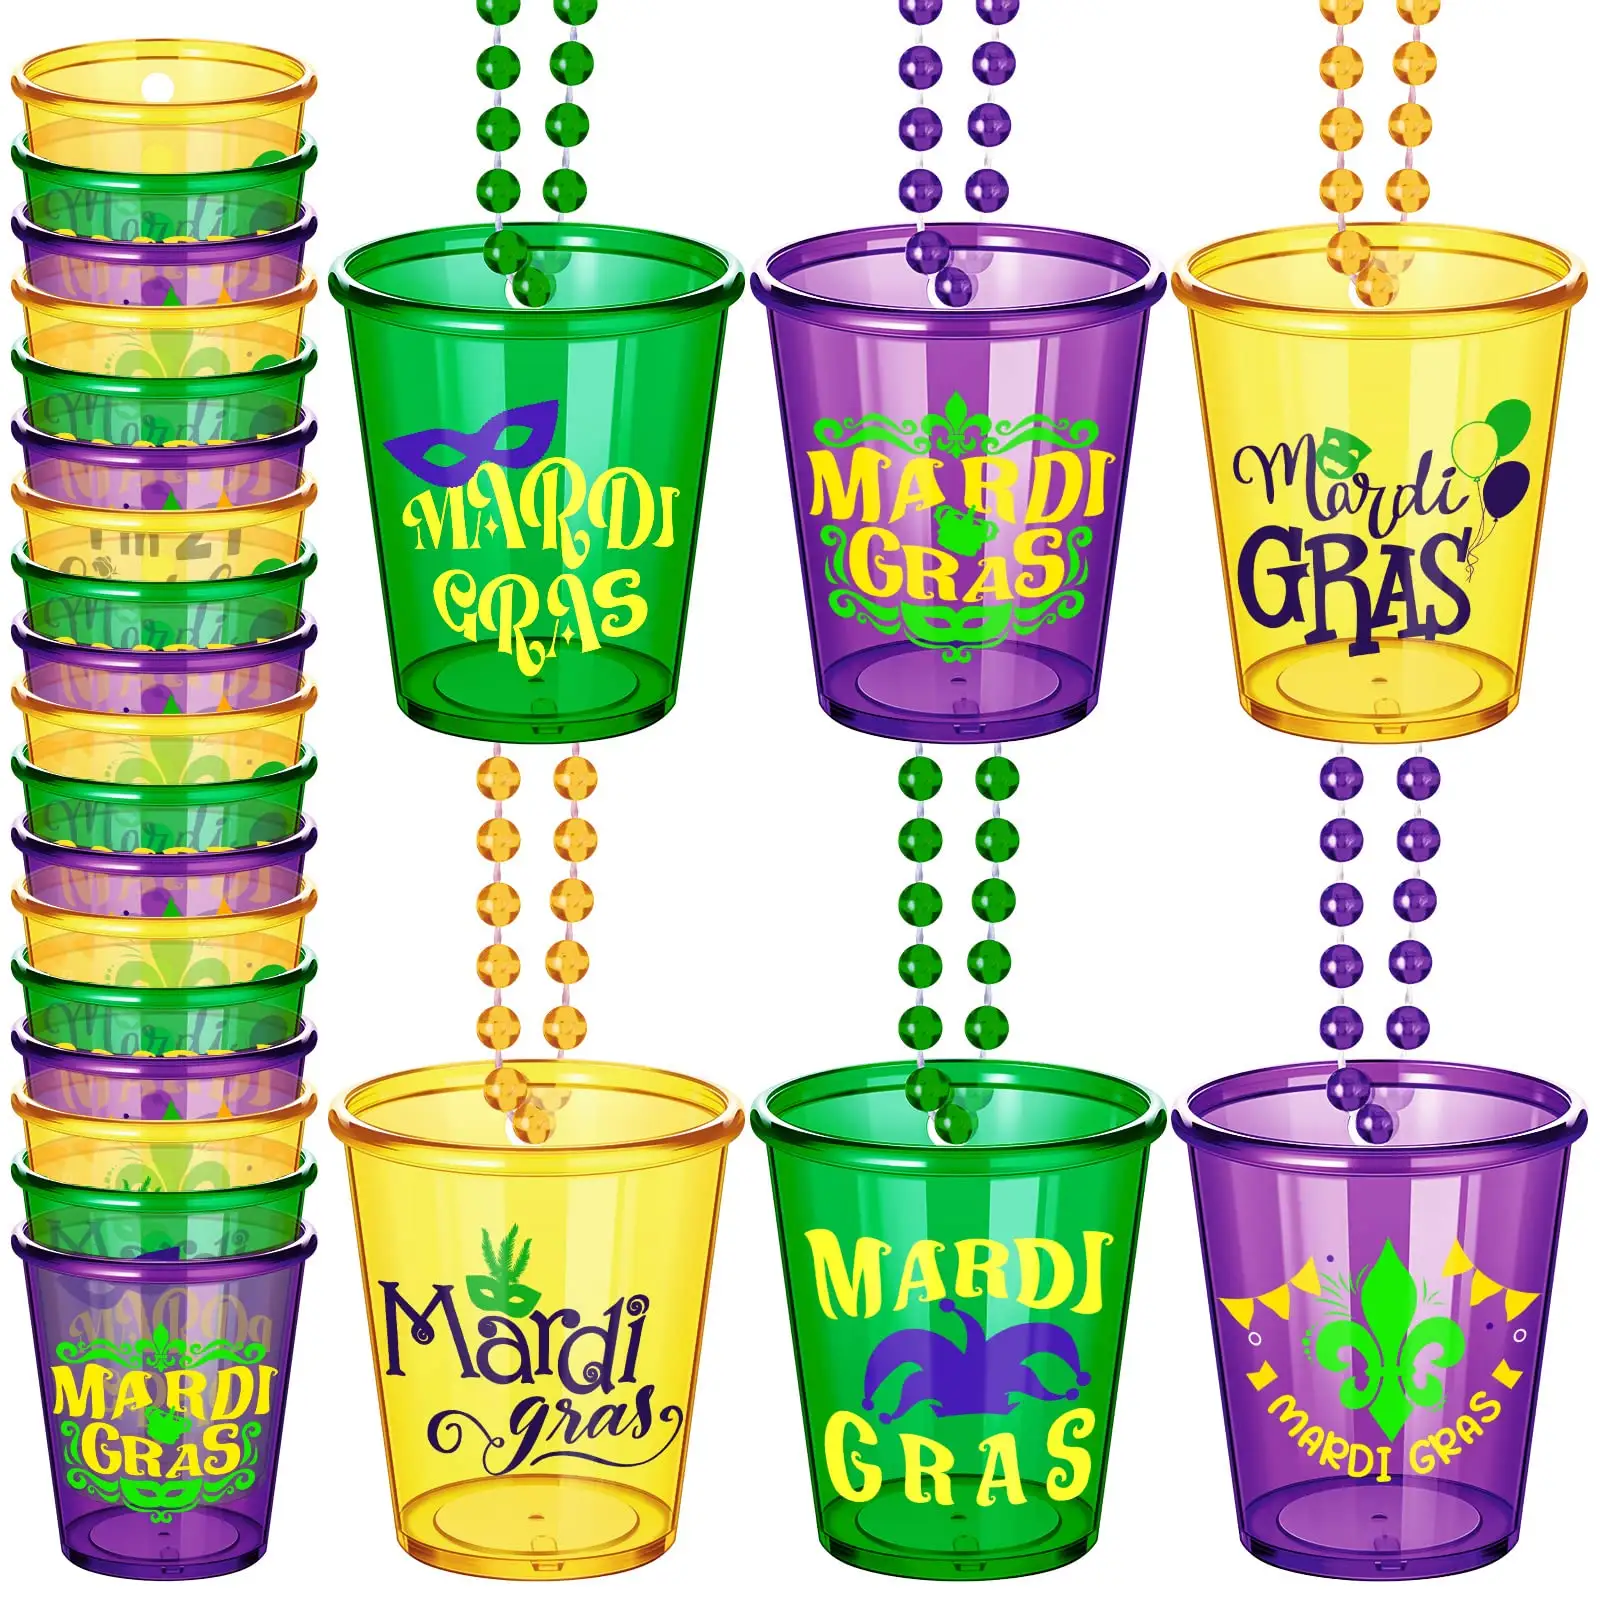 Mardi Gras Shot Glass Beaded Necklaces Plastic Necklace Cups For Mardi Gras Masquerade Gift Party Supplies